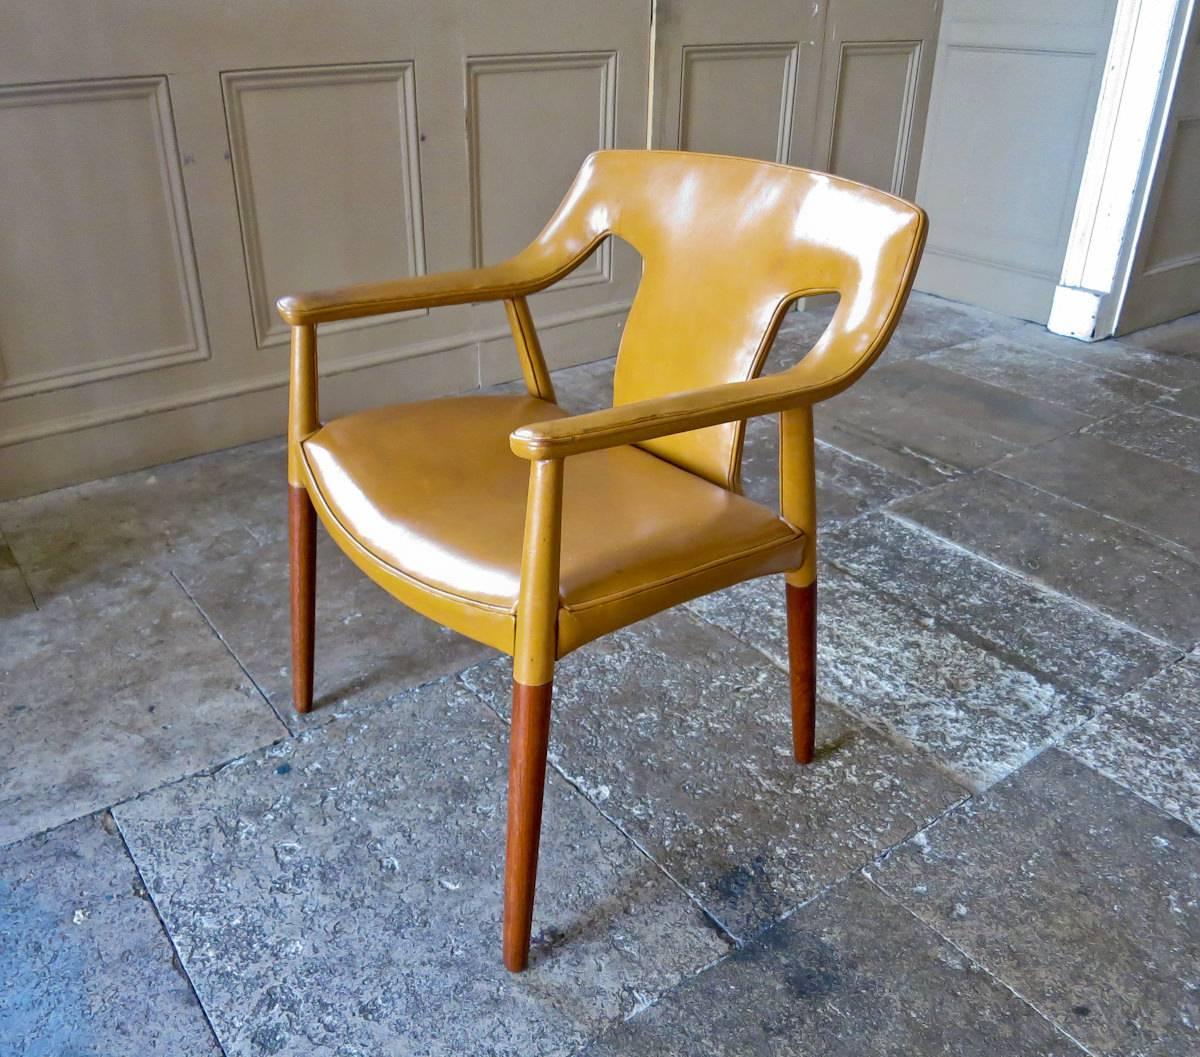 A beautiful and rare Danish armchair of sculptural form in teak and tan leather by Ejner Larsen & Aksel Bender Madsen, produced by master cabinetmaker Ludvig Pontoppidan.
A curved back splat that flows into the armrests supported by teak legs,